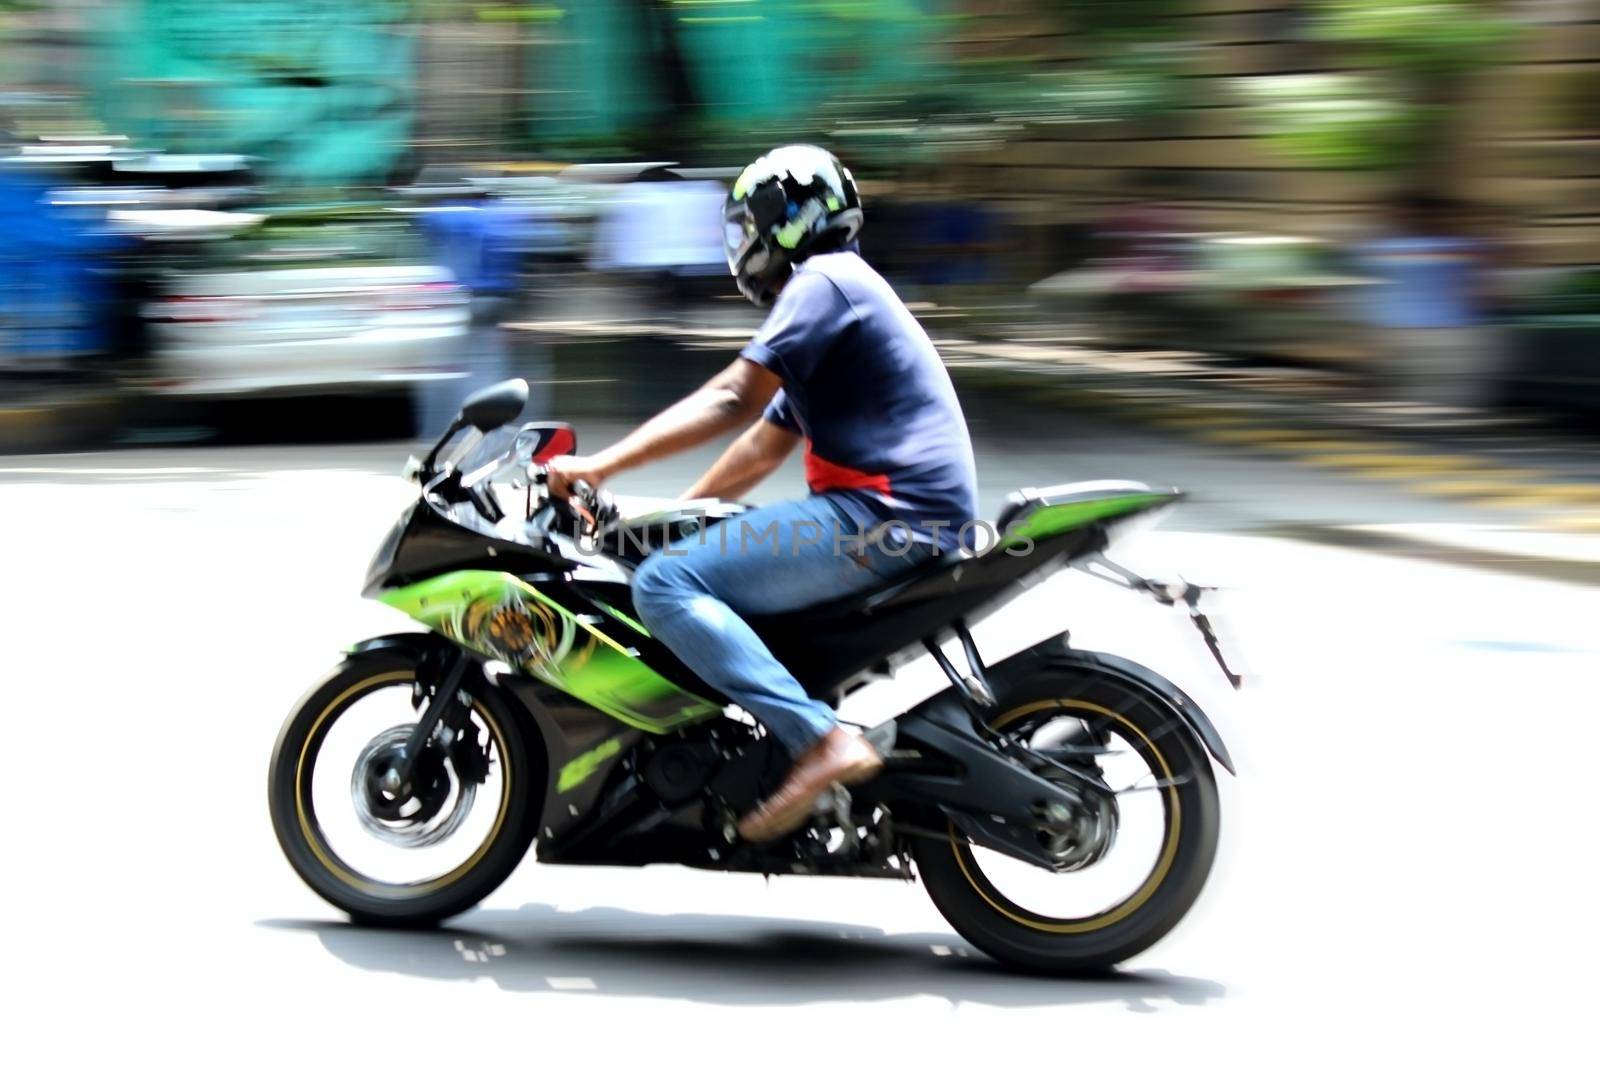 Motorcycle driver riding on road landscape with blurred motion effect of surrounding background. by tabishere